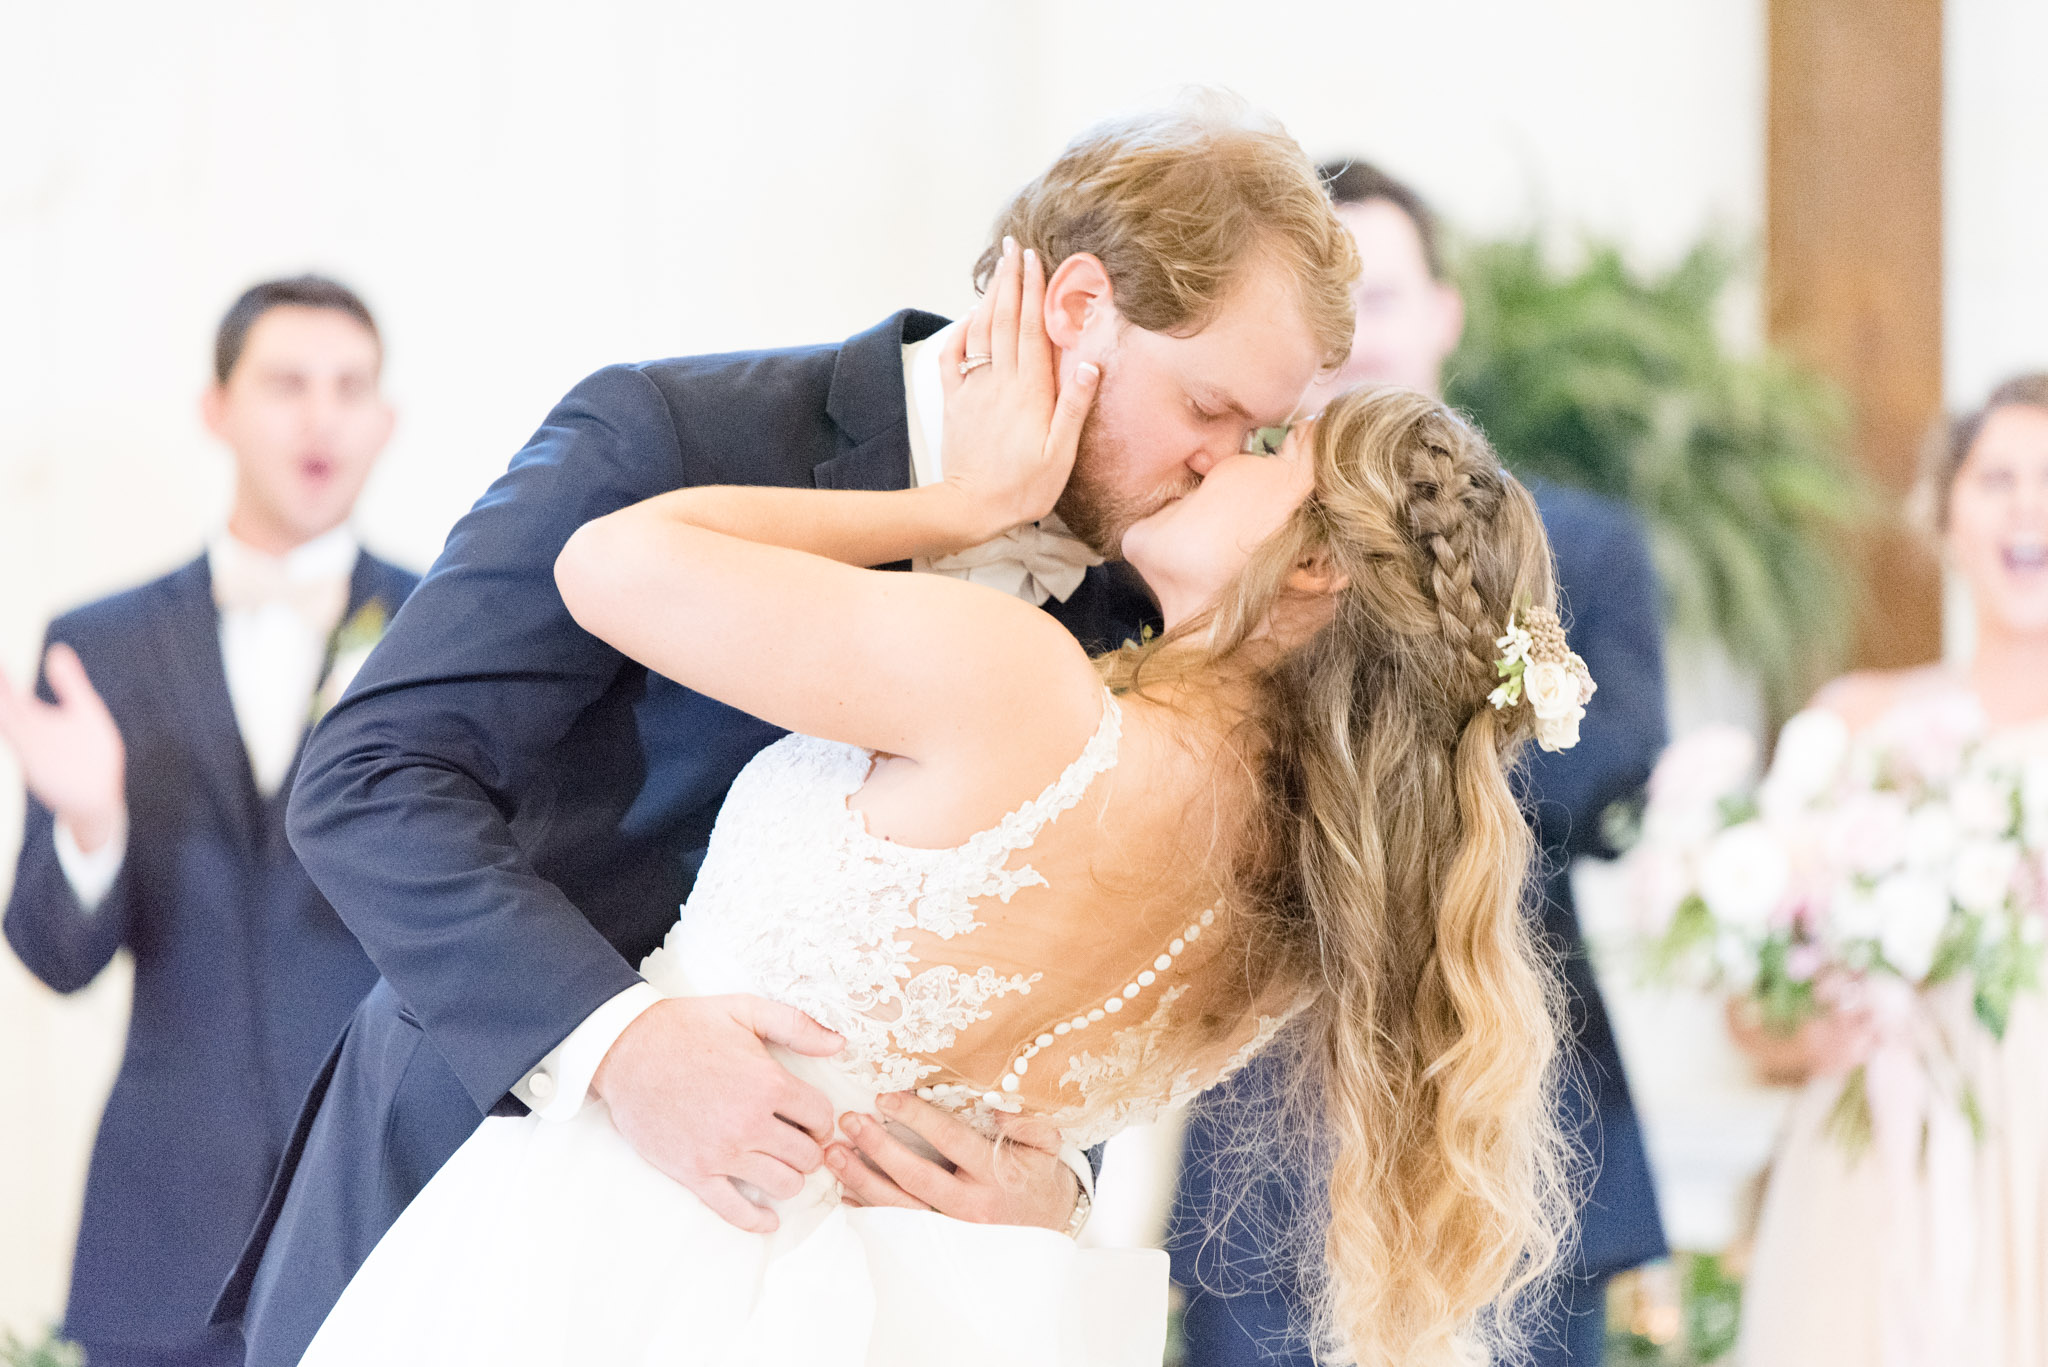 Groom dips bride during first dance.